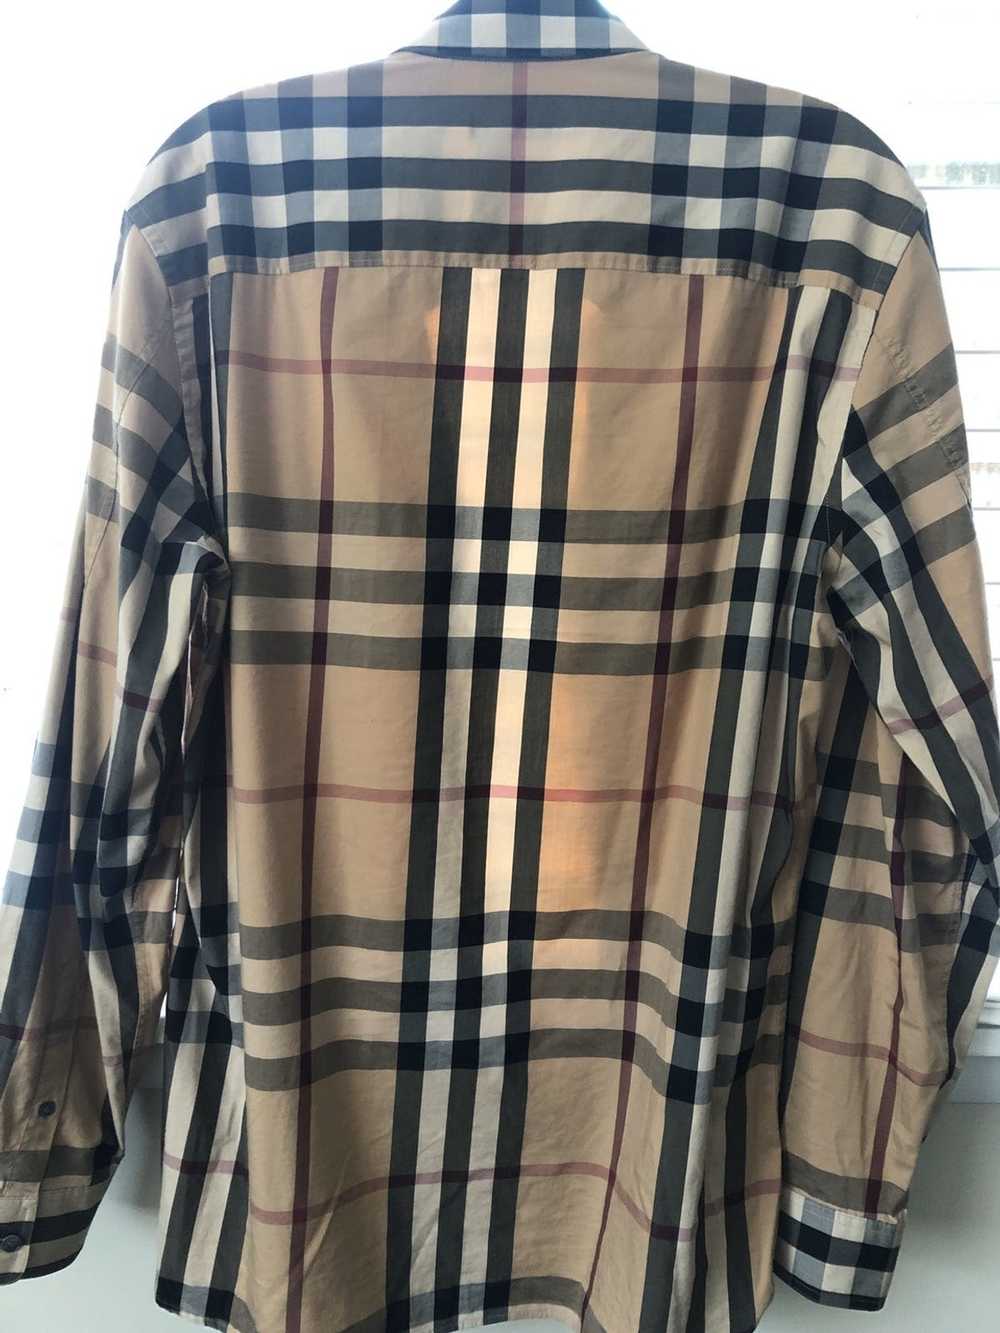 Burberry Burberry LongSleeve Button Up - image 2